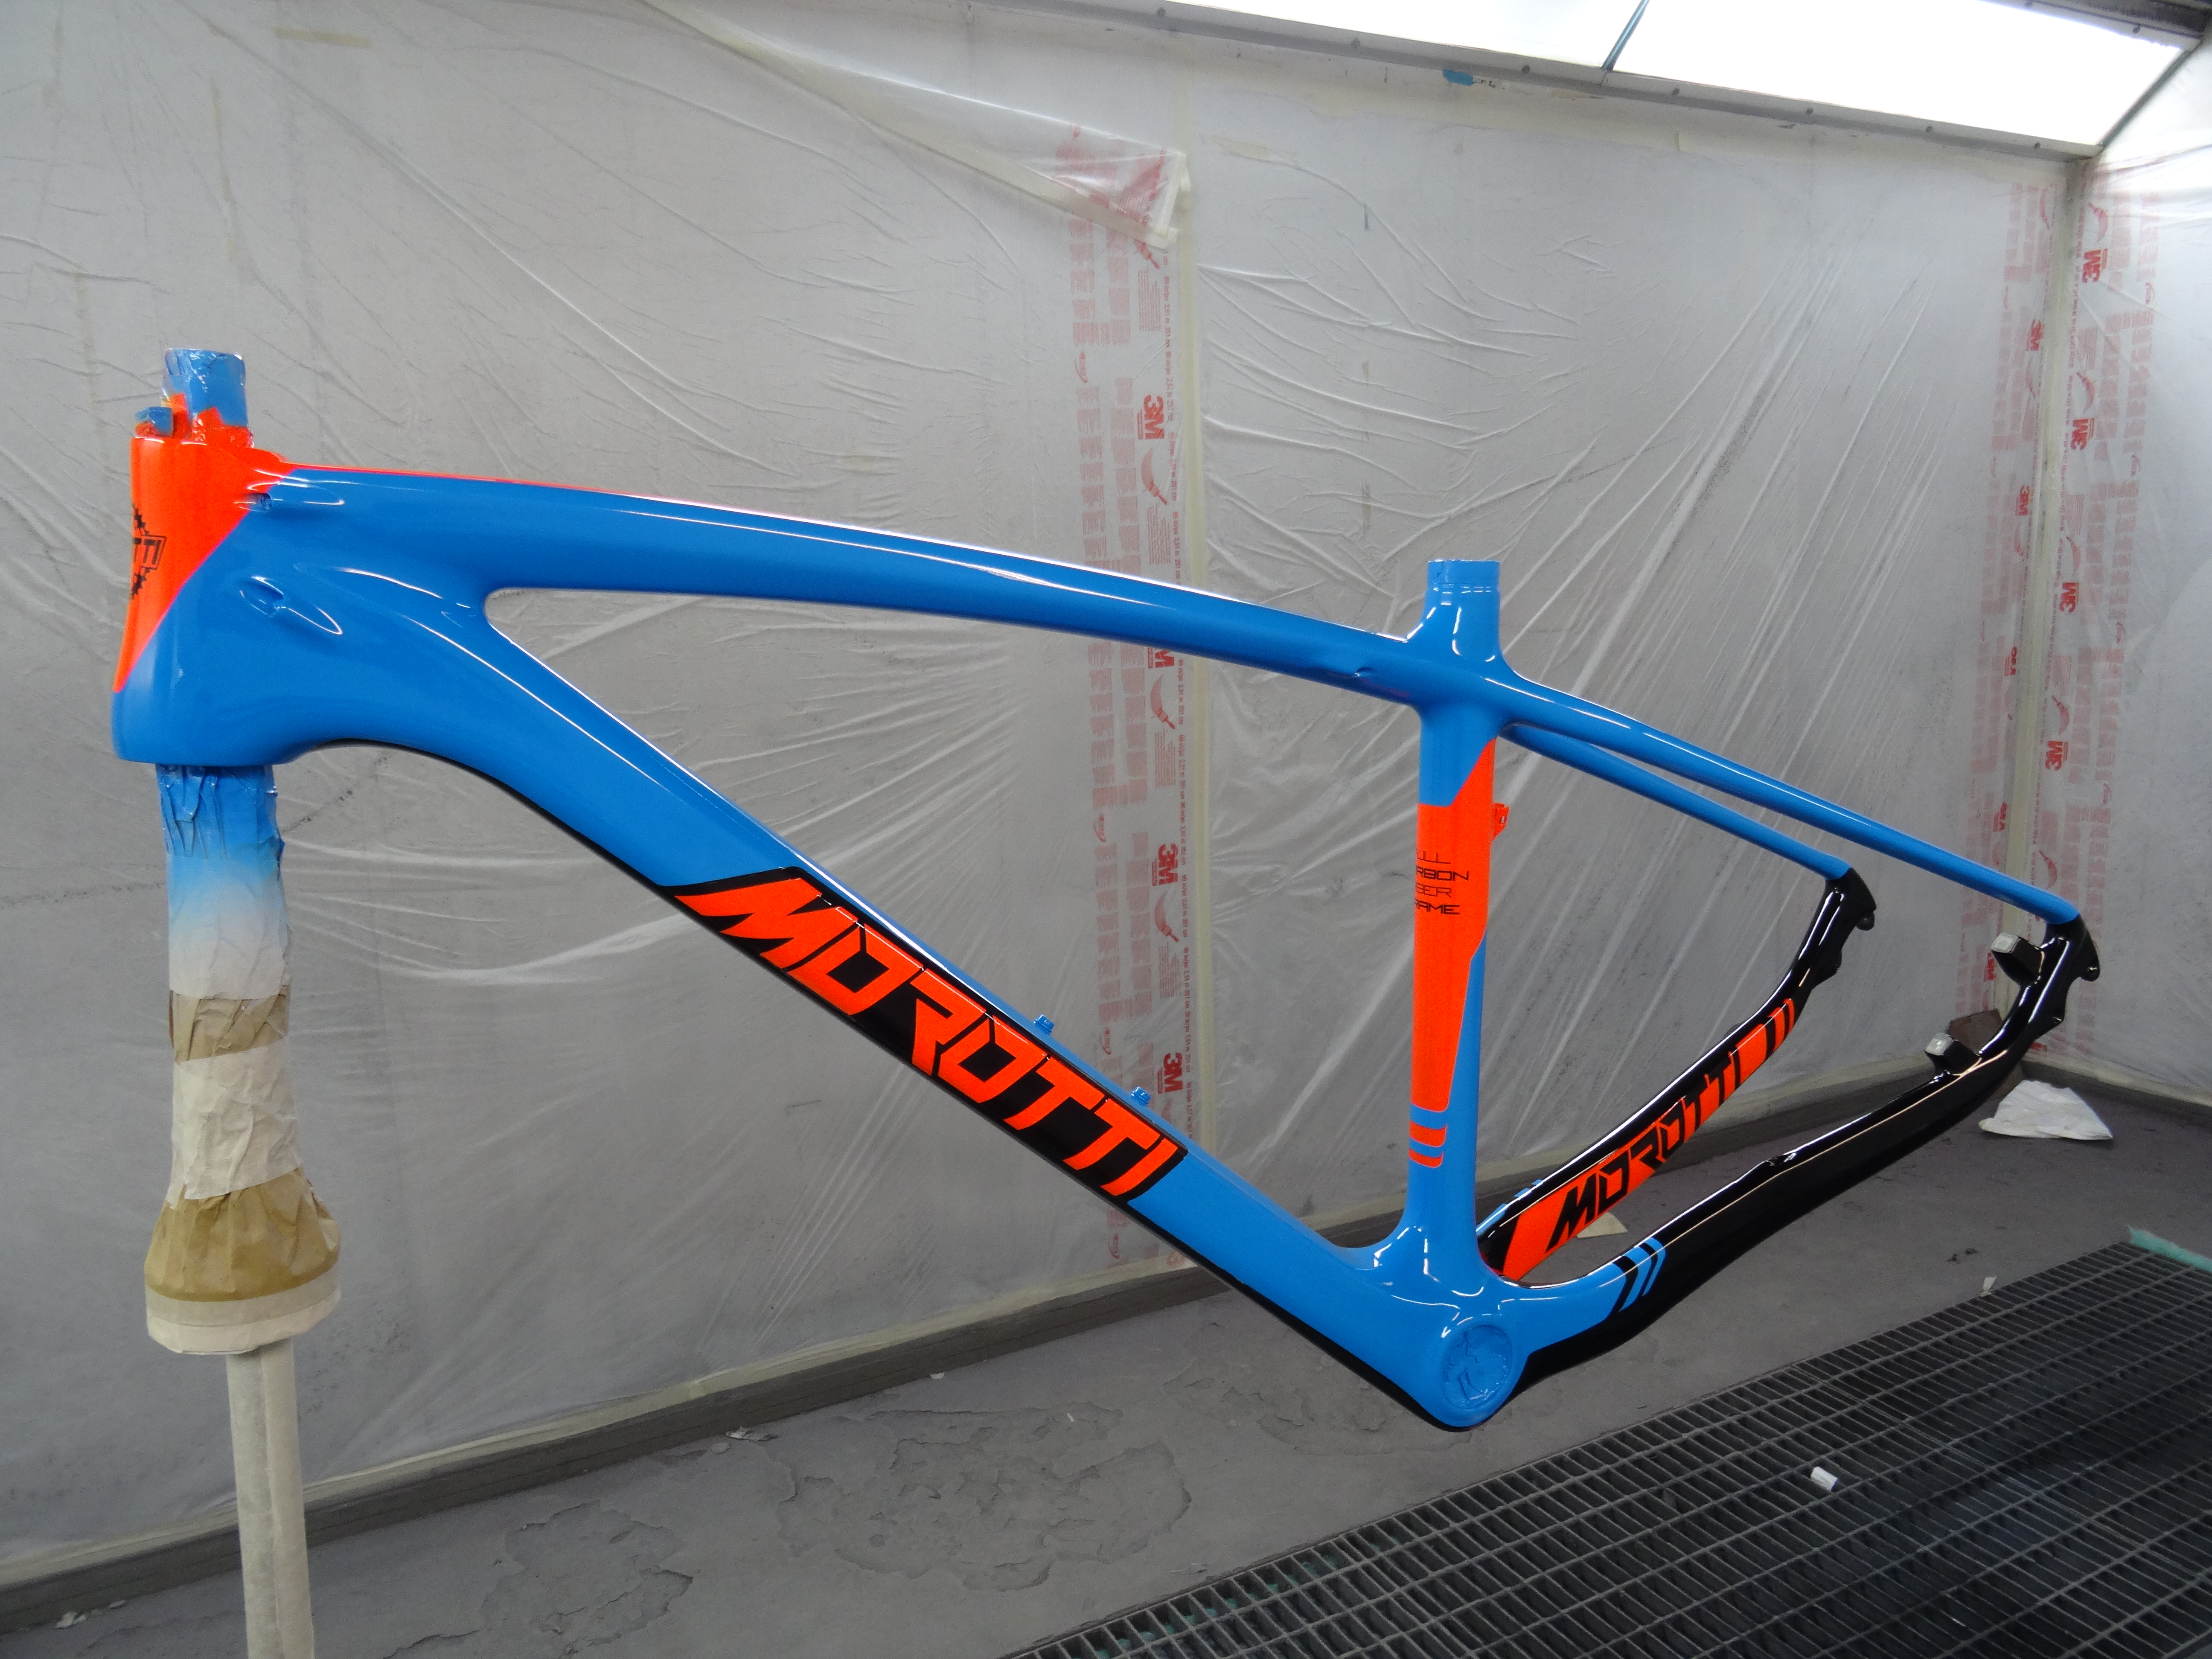 XC Carbon by MOROTTI